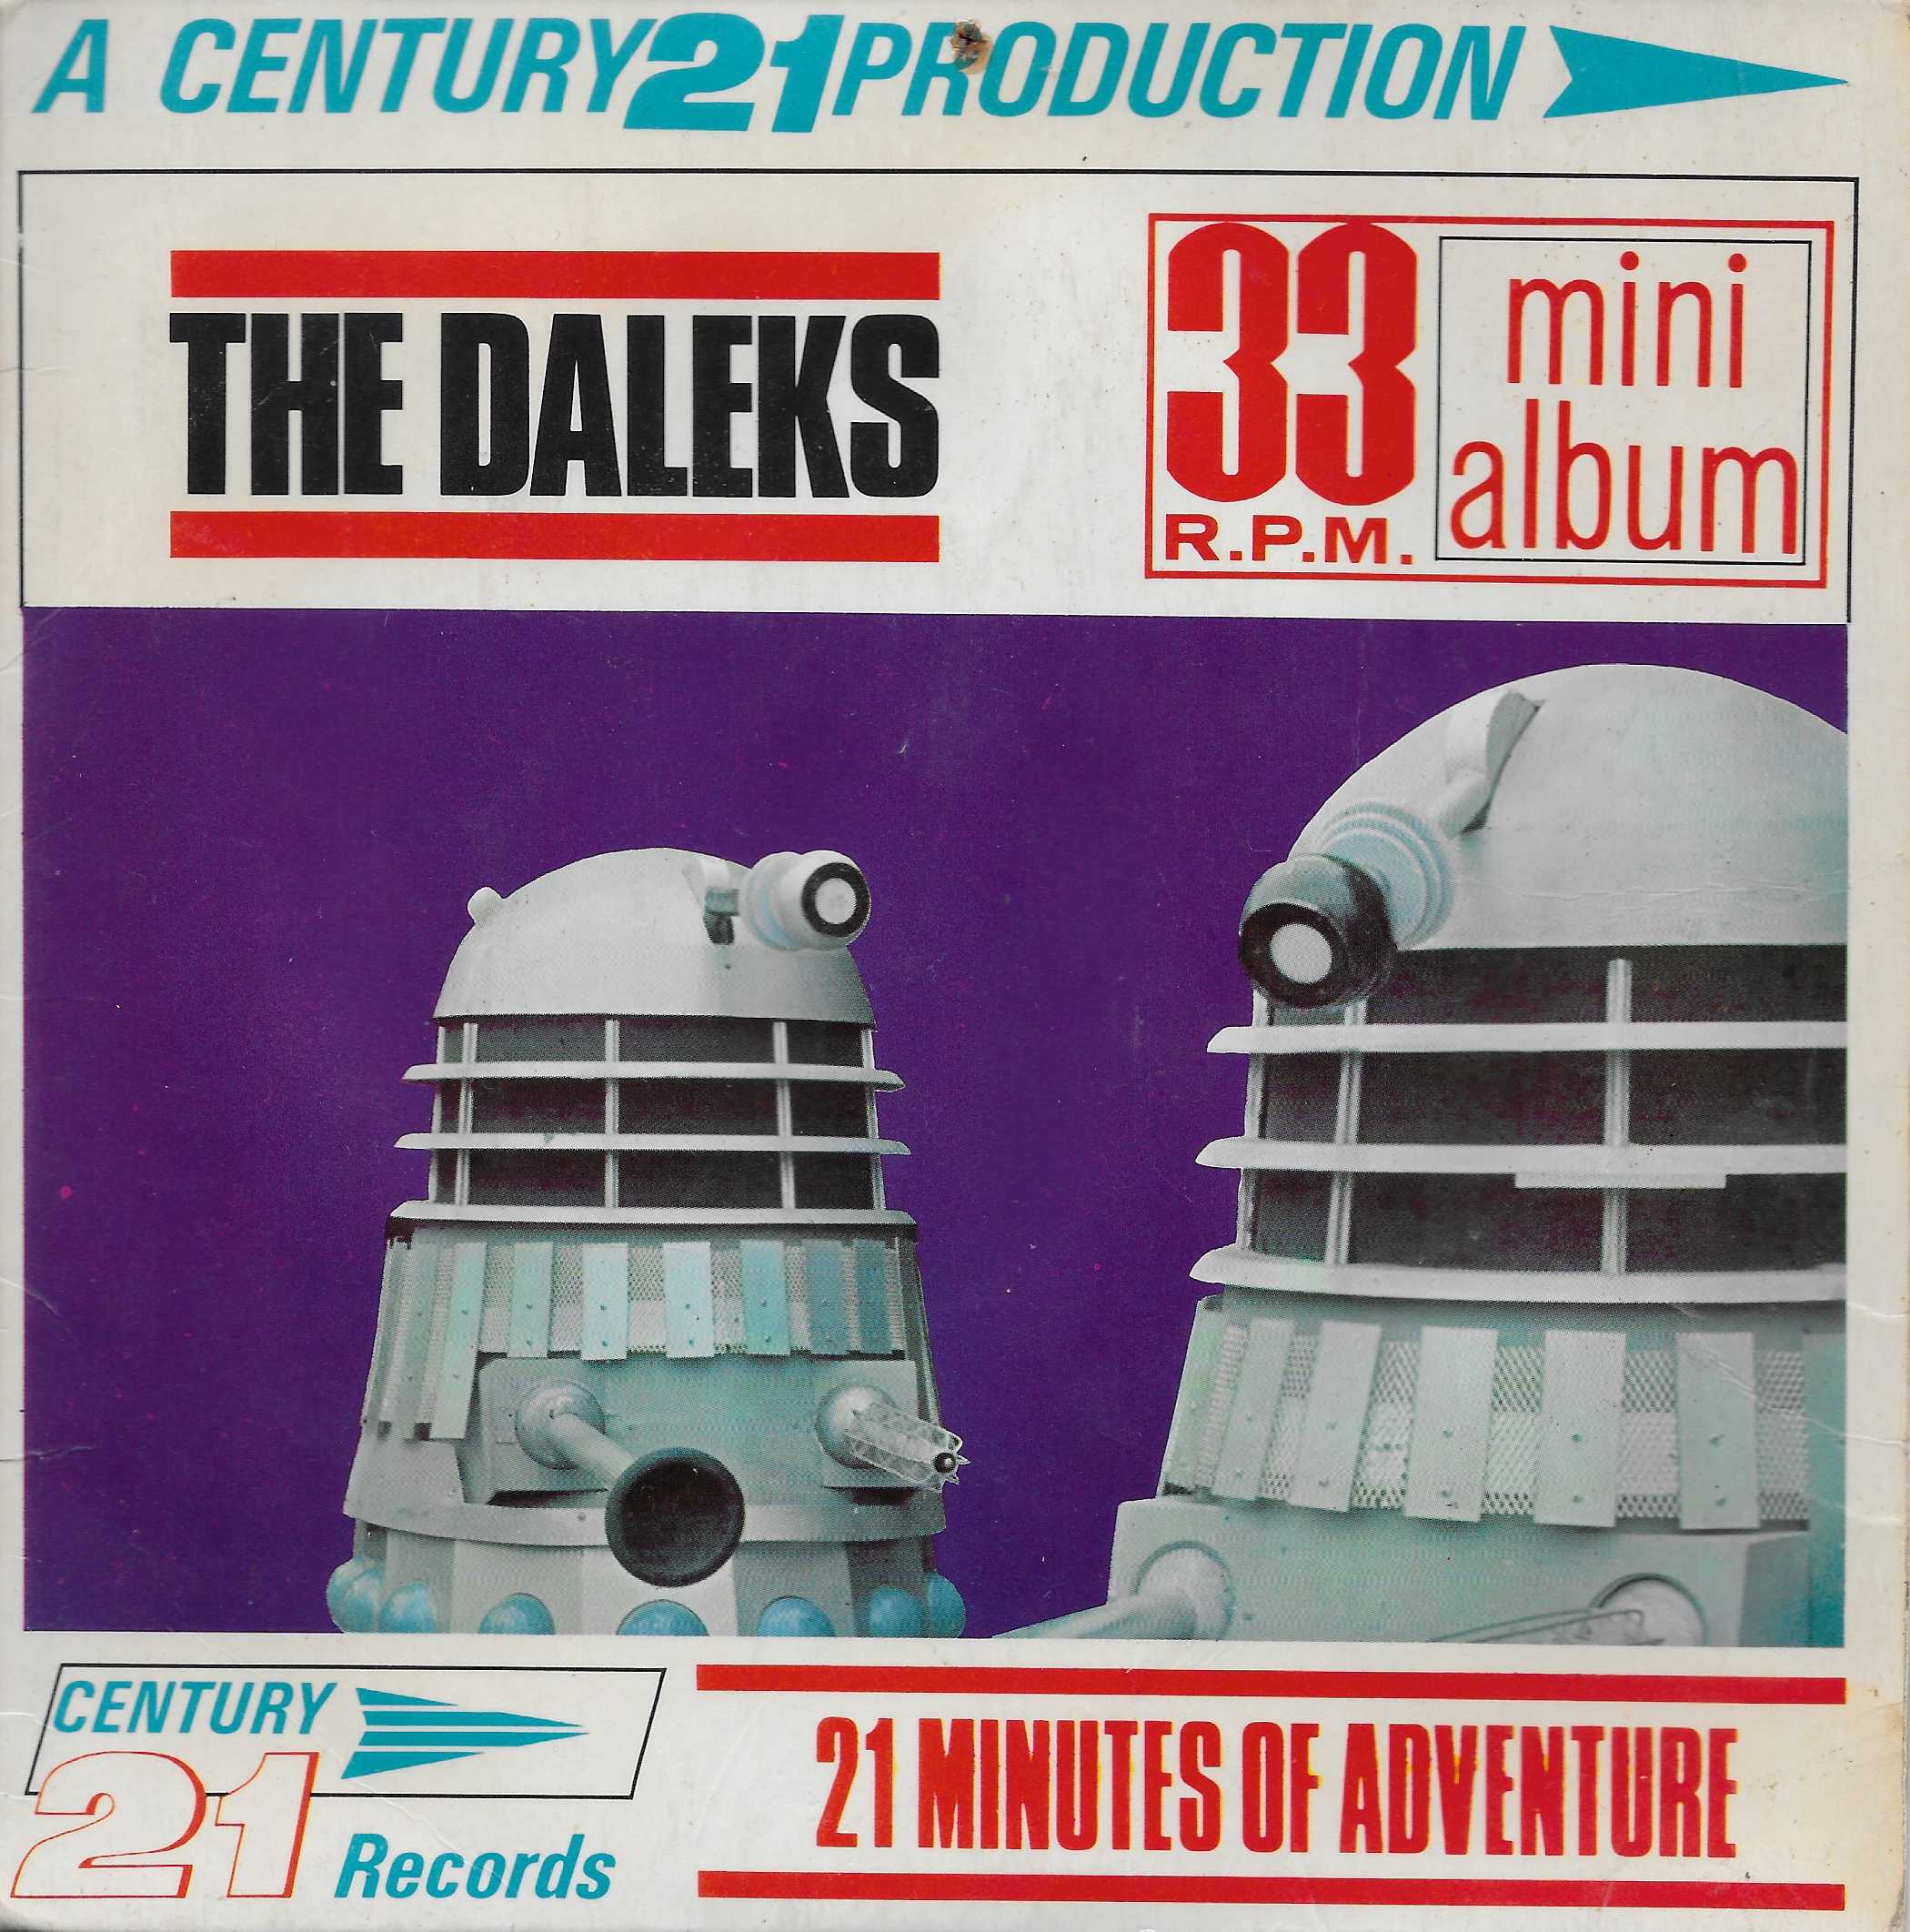 Picture of Doctor Who - The Daleks by artist Eric Winston Orchestra from ITV, Channel 4 and Channel 5 singles library